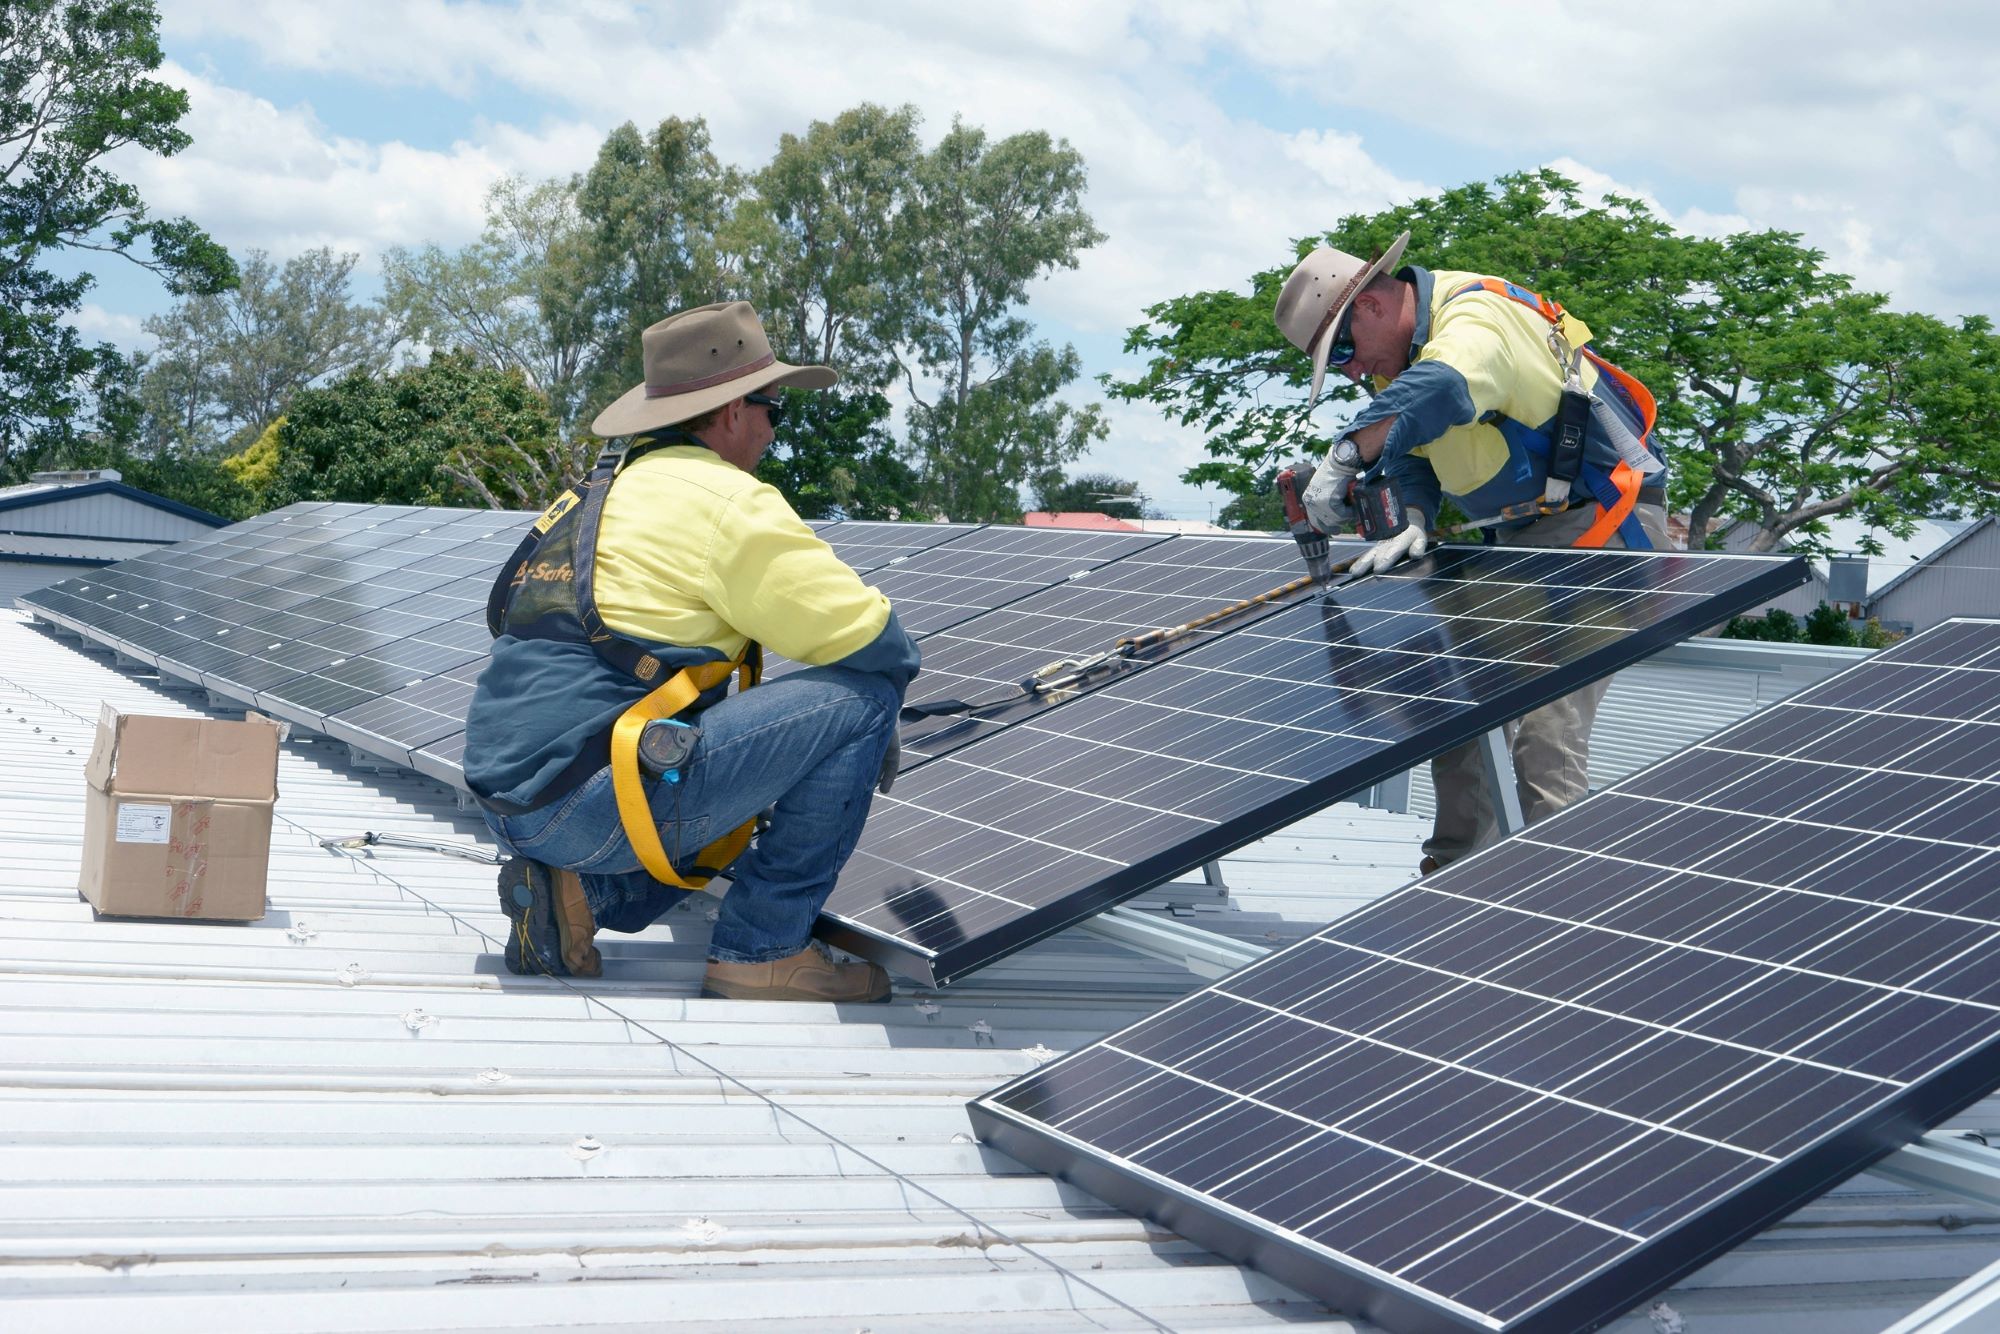 Solar installers drilling in solar panels on a roof